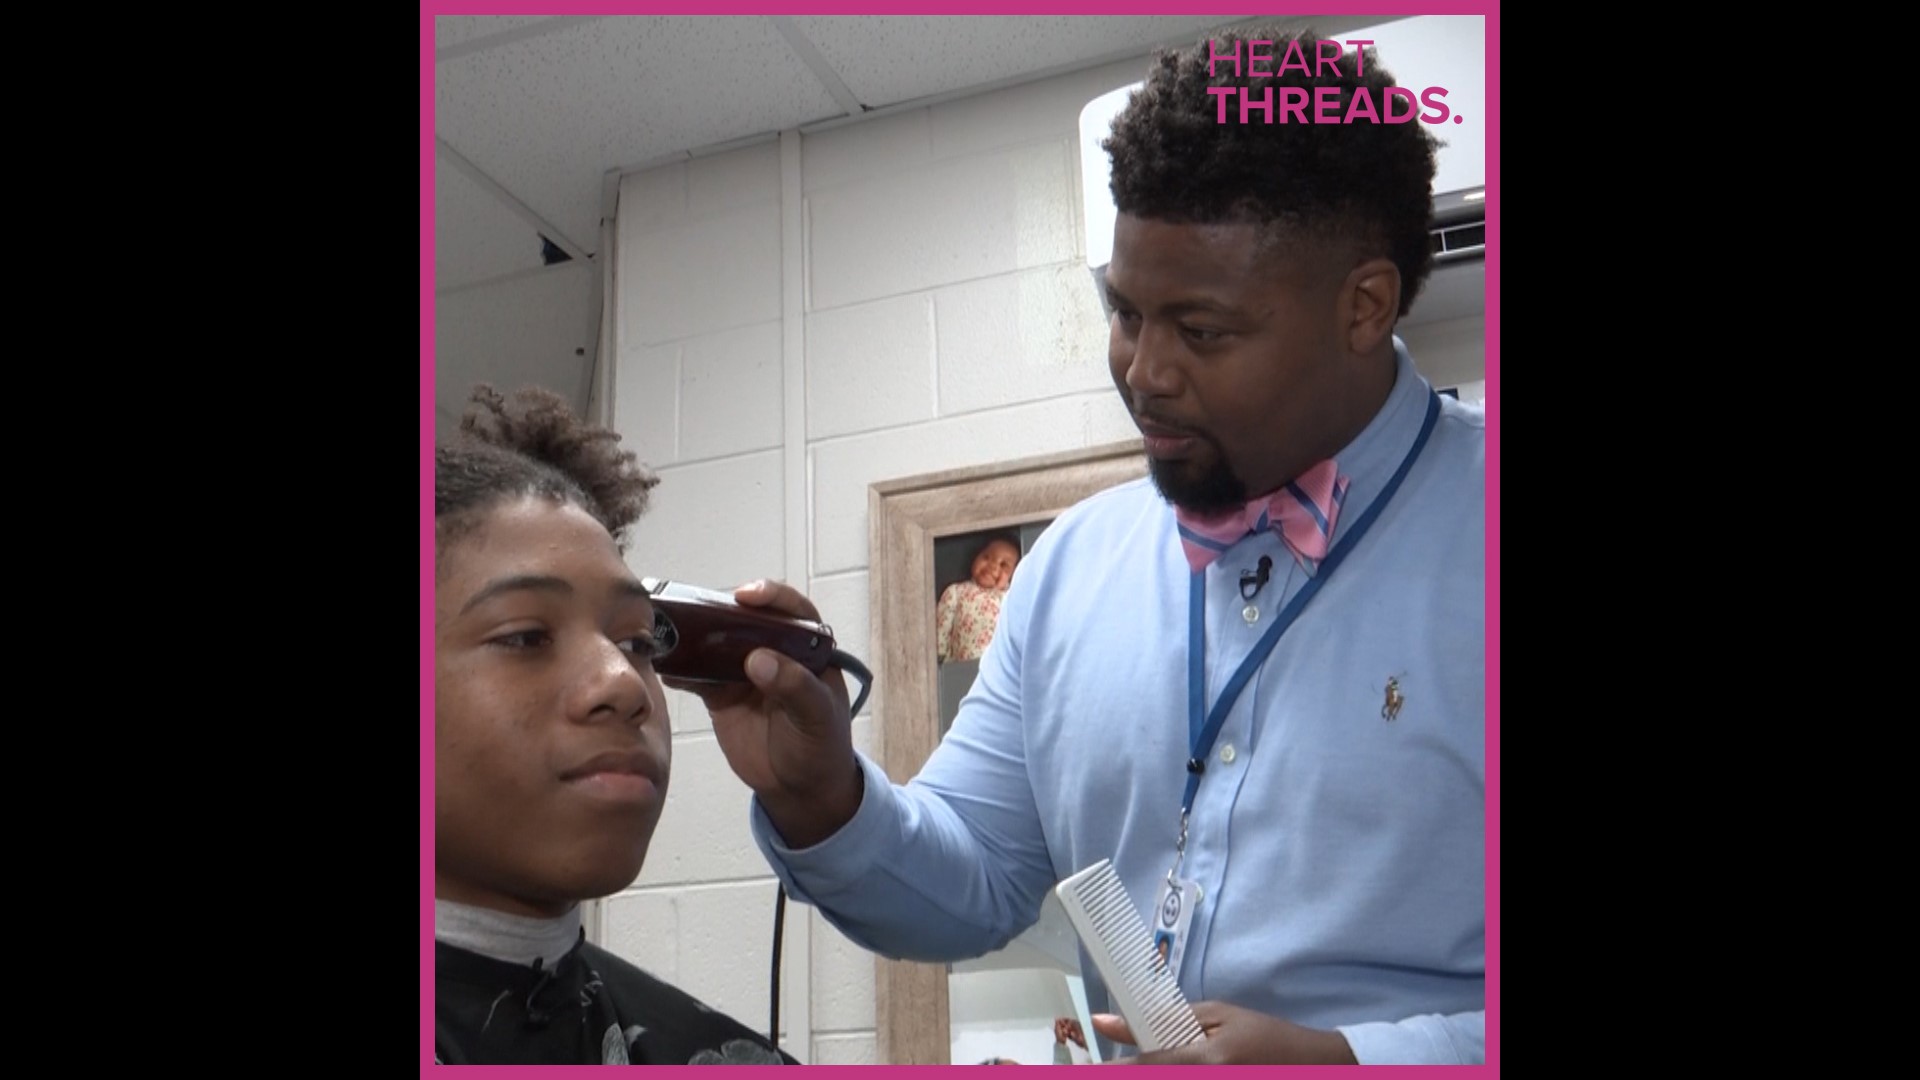 To pay his way through college, Le'Shaun Mathis cut hair. Now the assistant principal gives students free haircuts as a way to connect and bond with them.